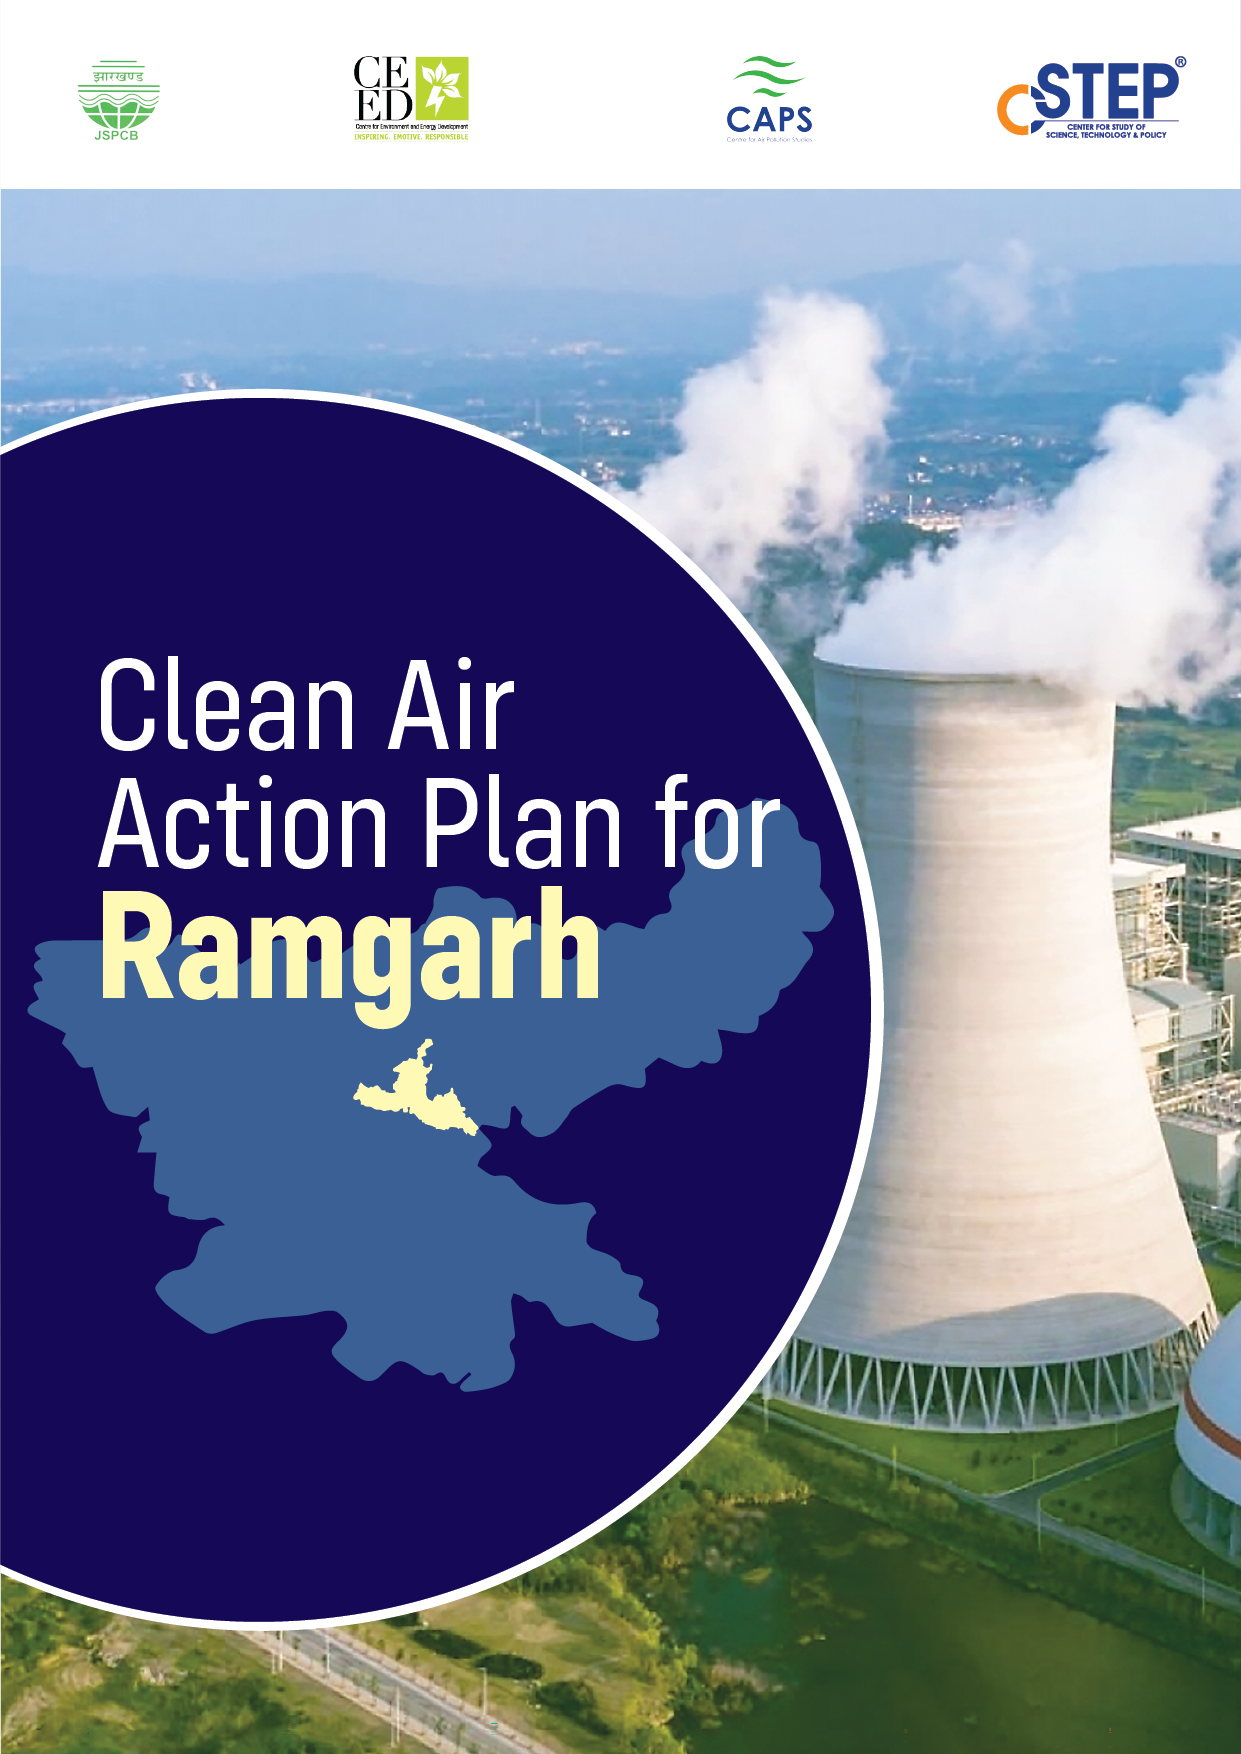 Clean Air Action Plan for Ramgarh